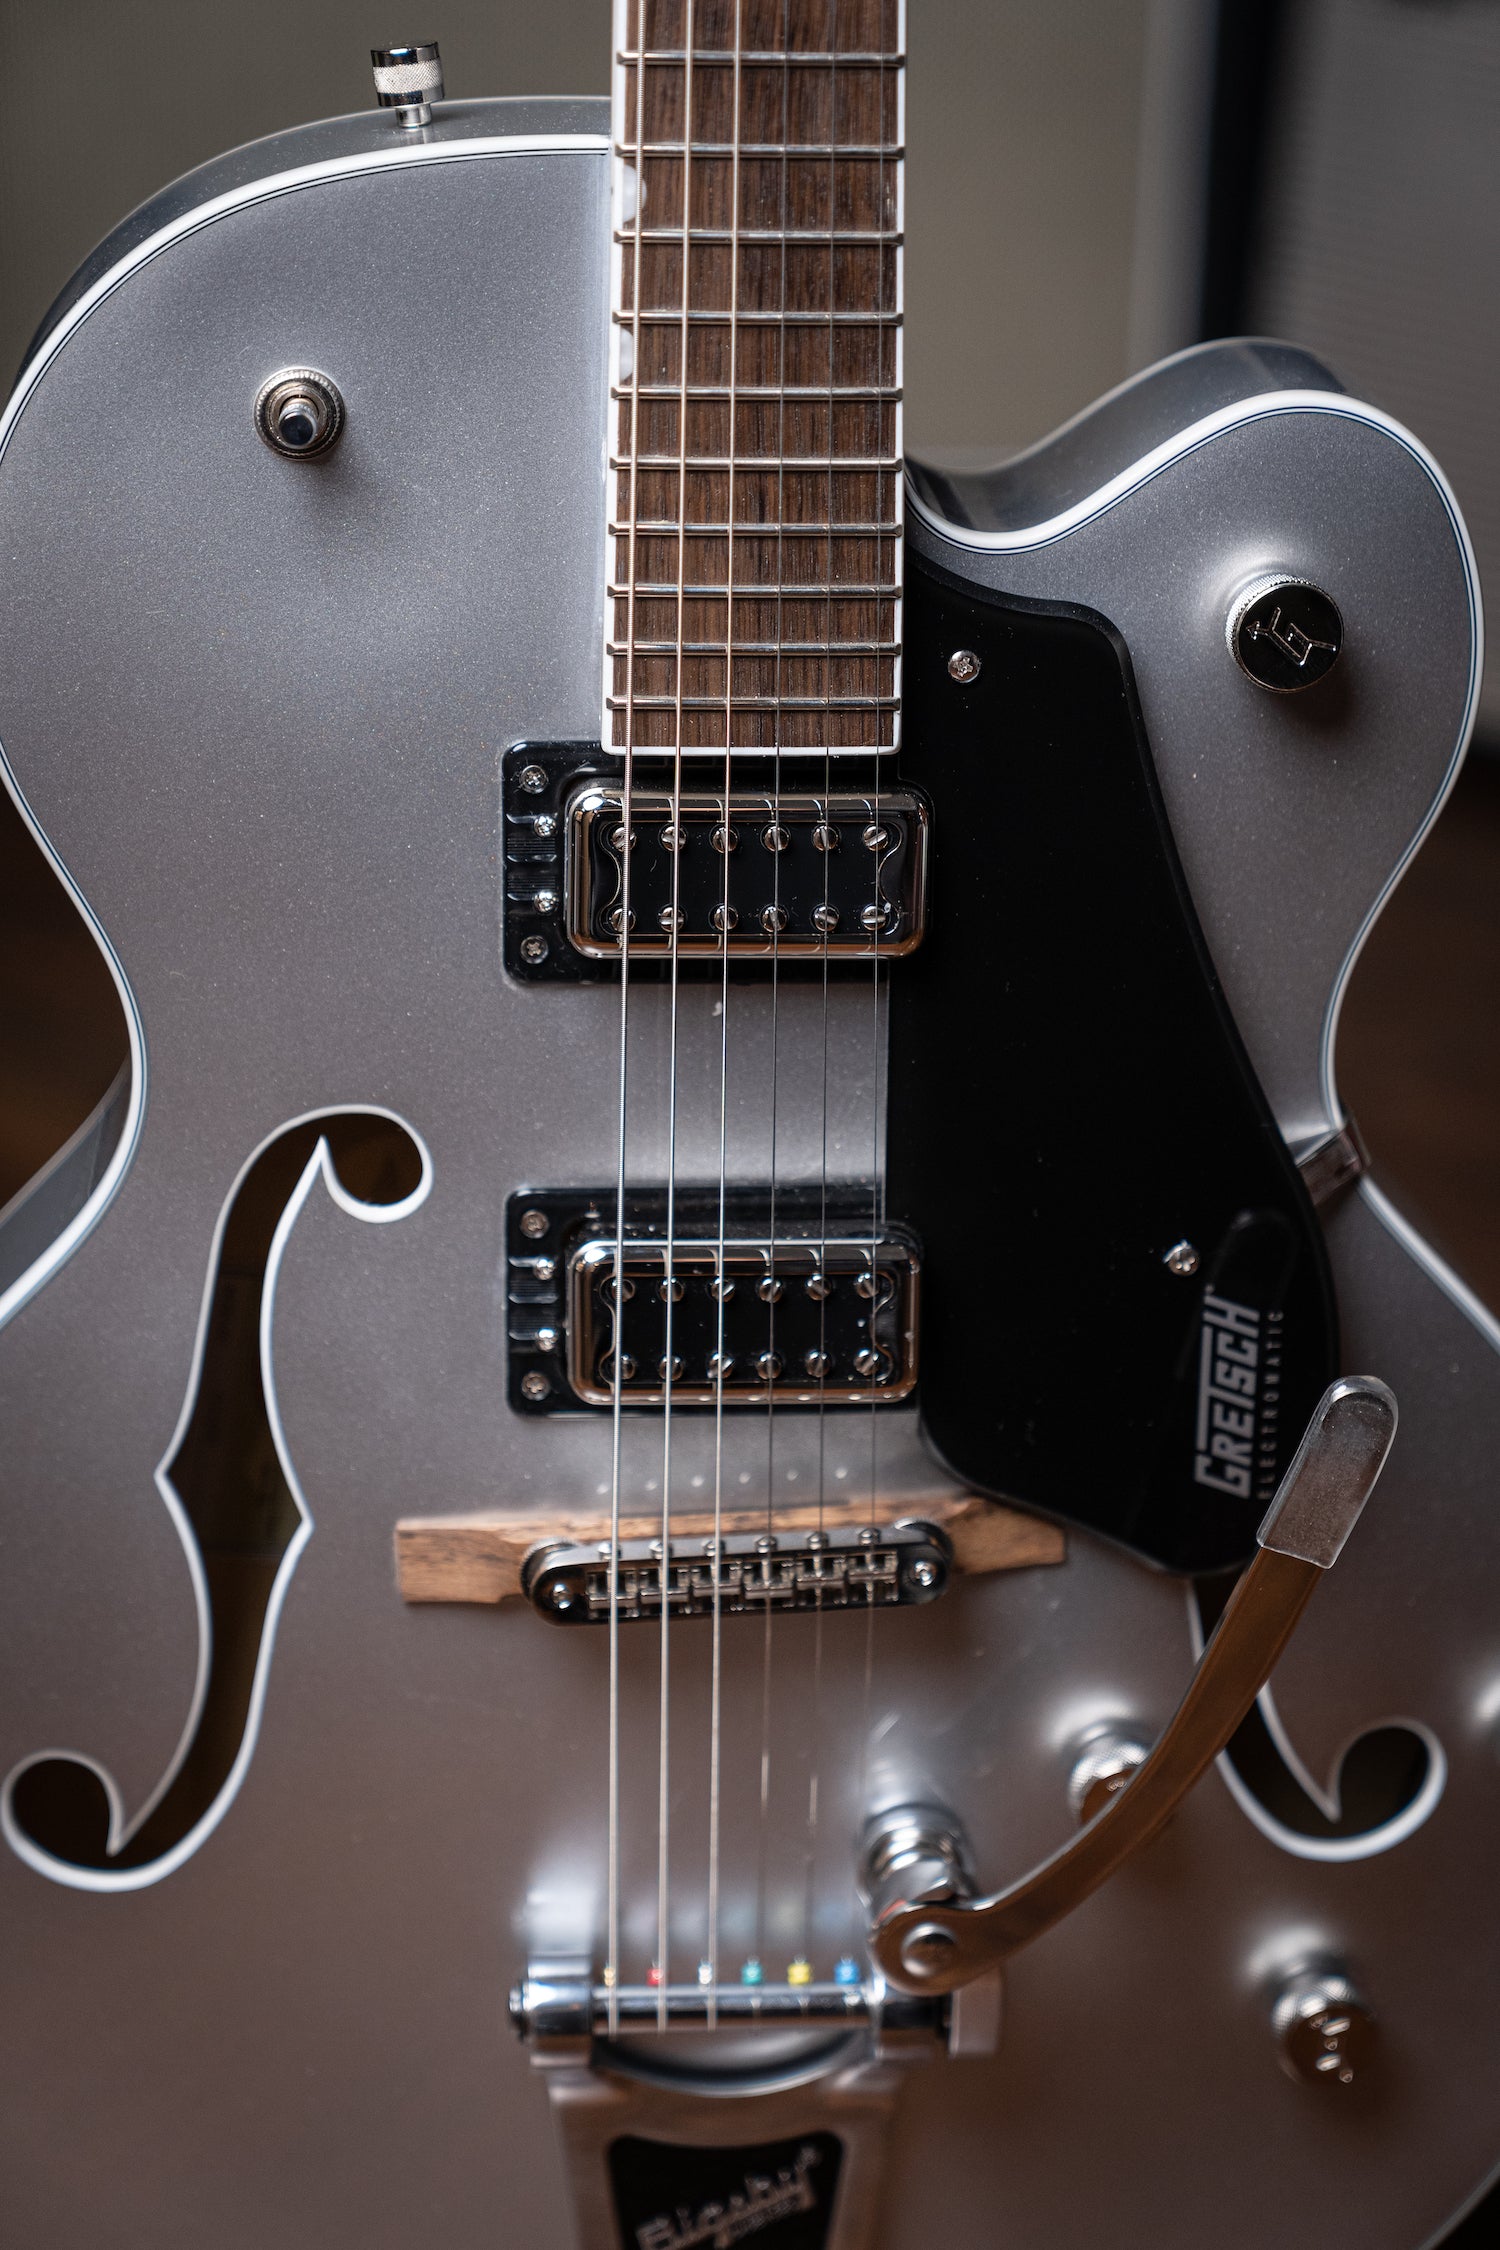 Gretsch GT Electromatic Classic Hollow Body Single Cut with